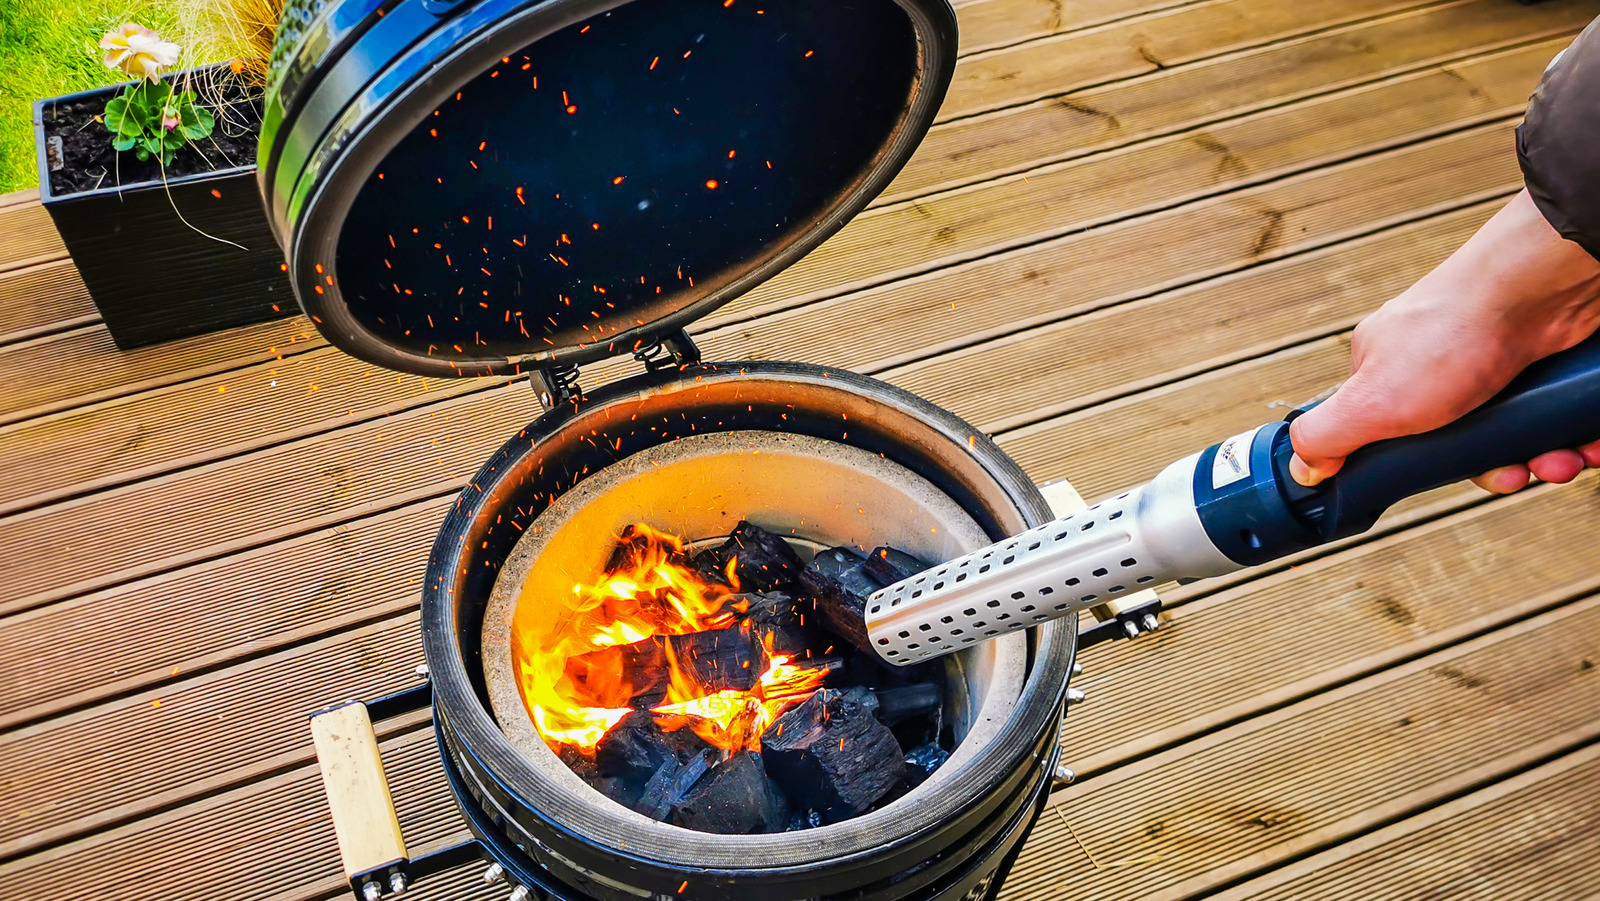 https://www.mashed.com/img/gallery/the-kamado-grills-you-can-buy-in-2022/l-intro-1667234712.jpg